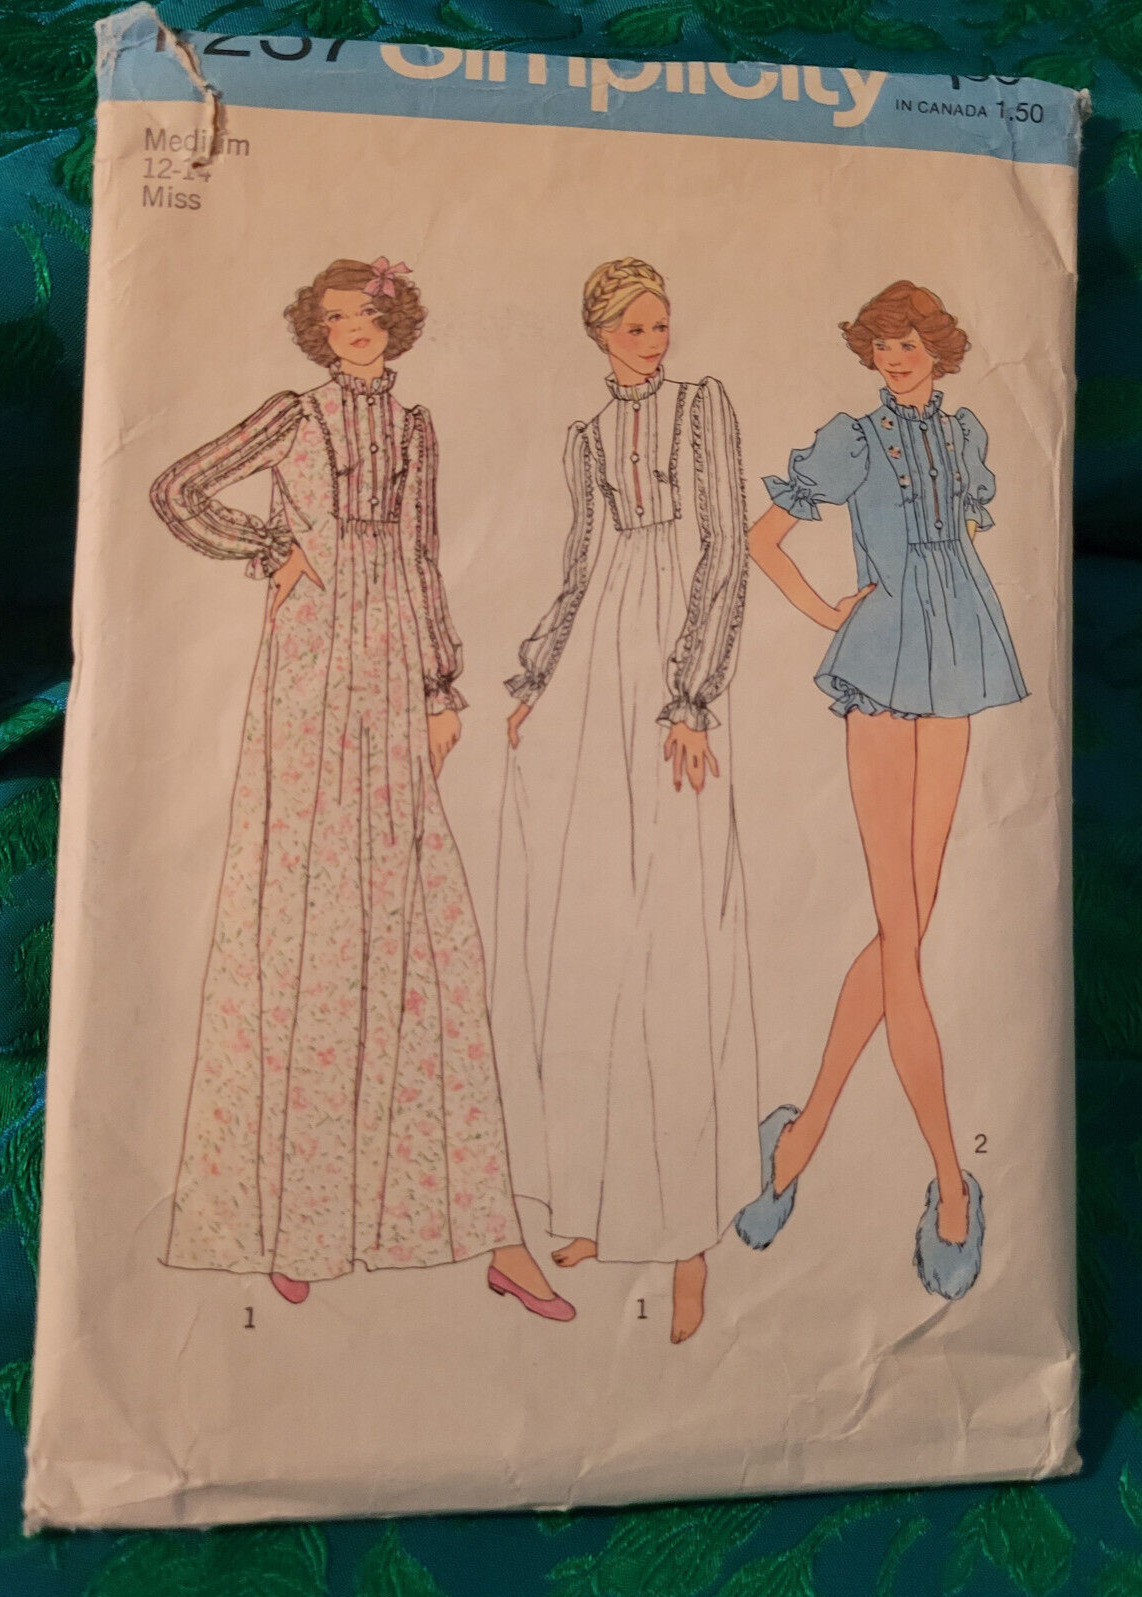 Vintage 1975 Simplicity Dress or Nightgown Pattern # 7237 size 12 - 14 Cut